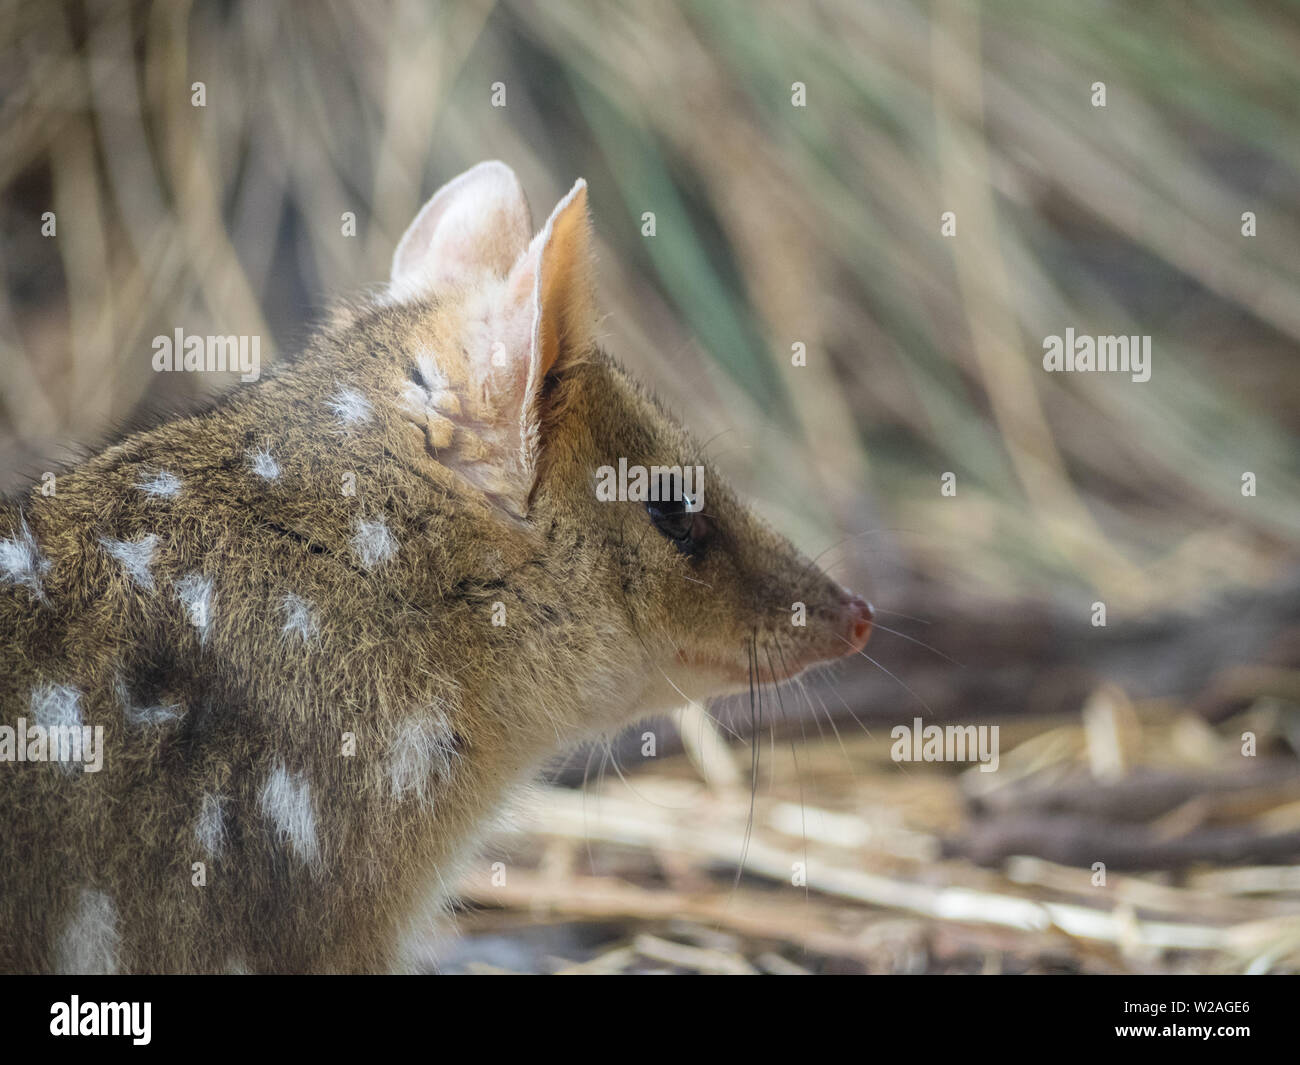 Eastern quoll head close-up Stock Photo